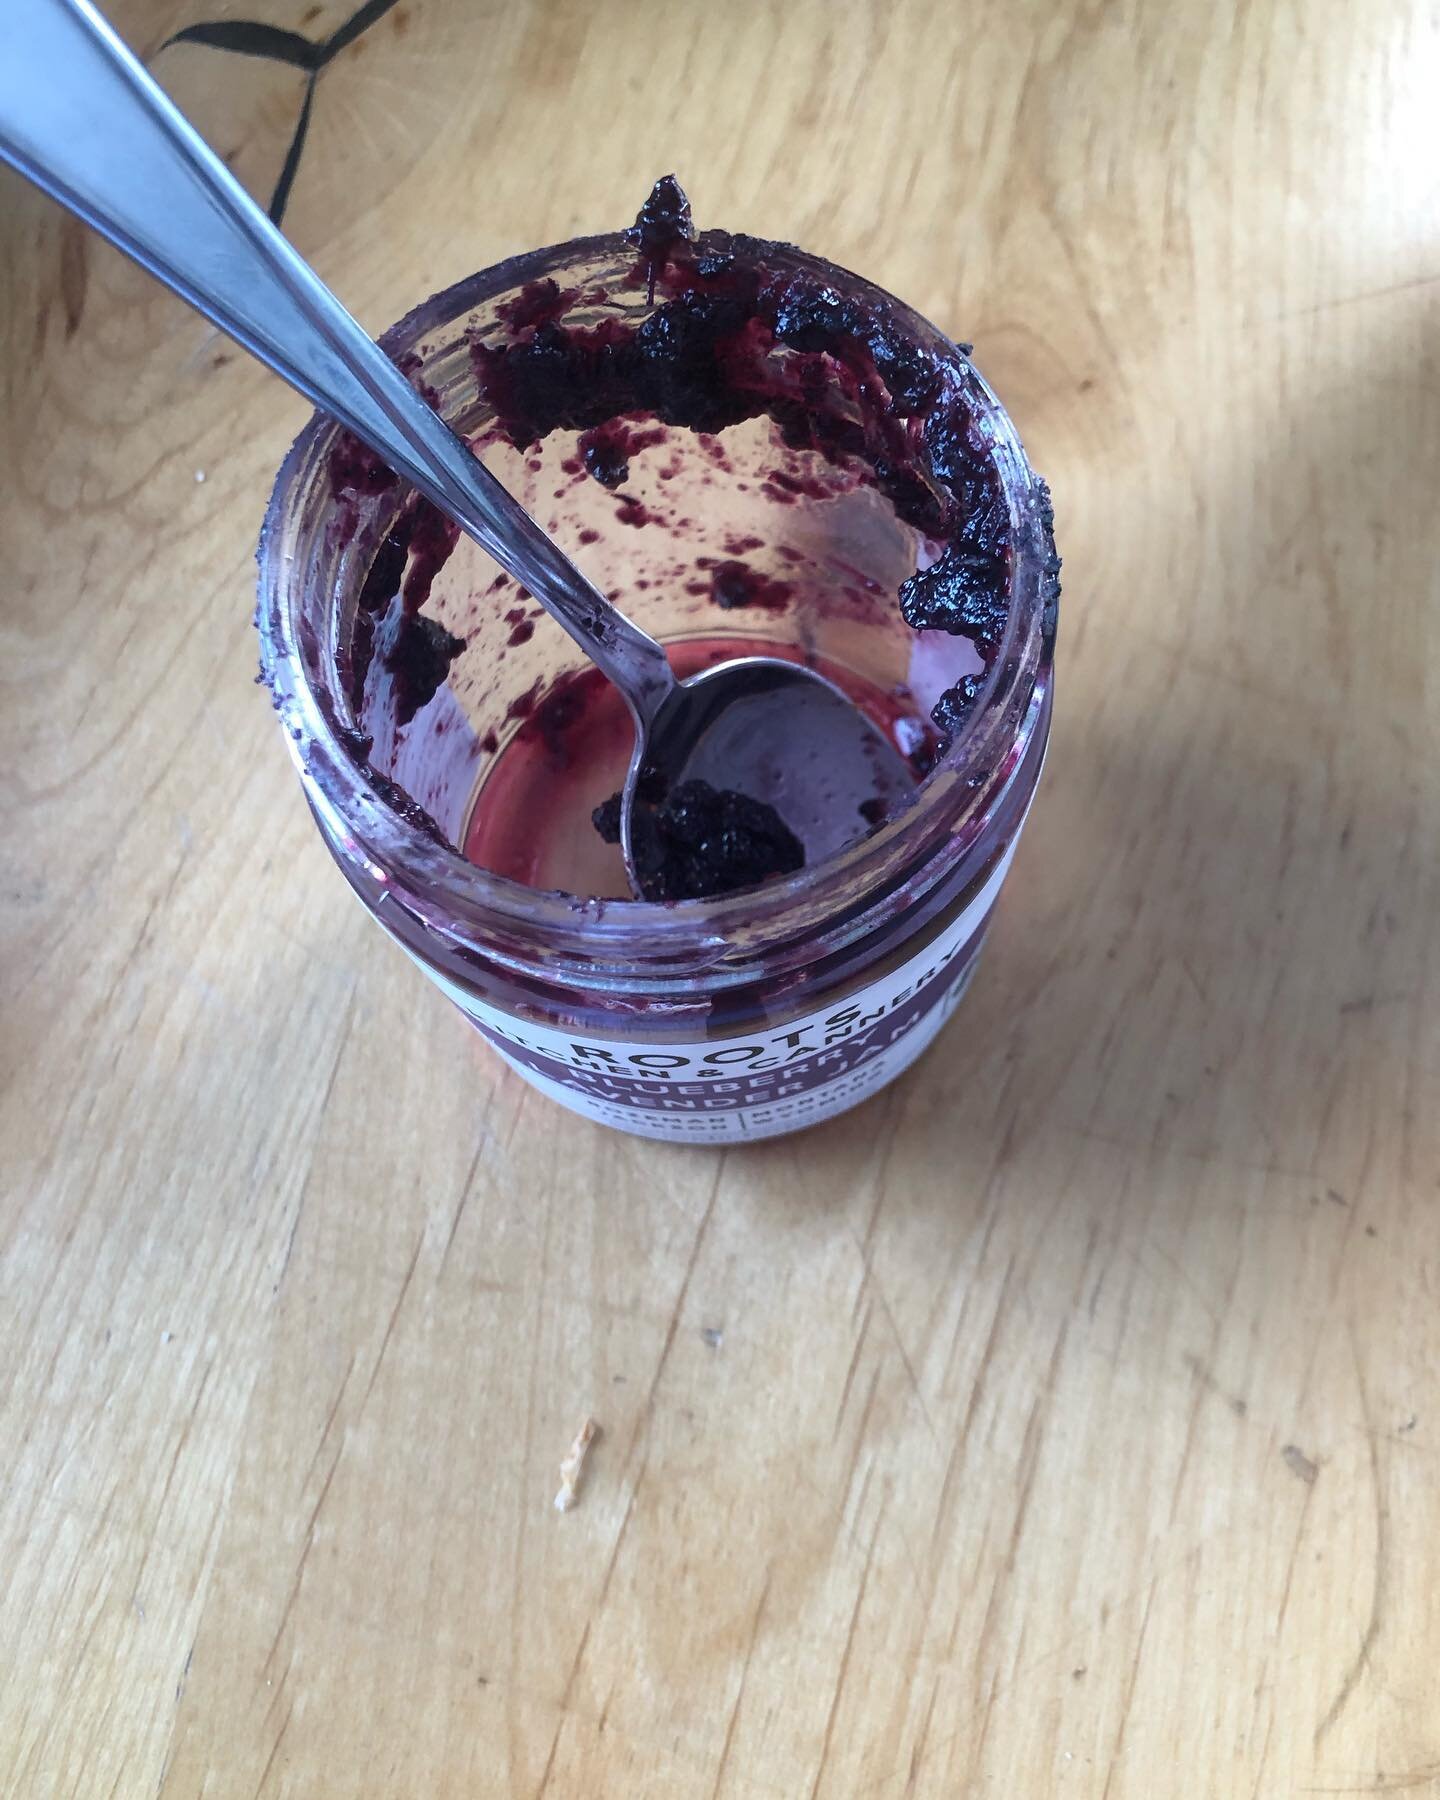 Ode to the empty jar. It is a love hate relationship, always wanting more but it feels so good to lick it clean. Go ahead, restock after a long February, you deserve it! 

#jam #blueberry #lavendar